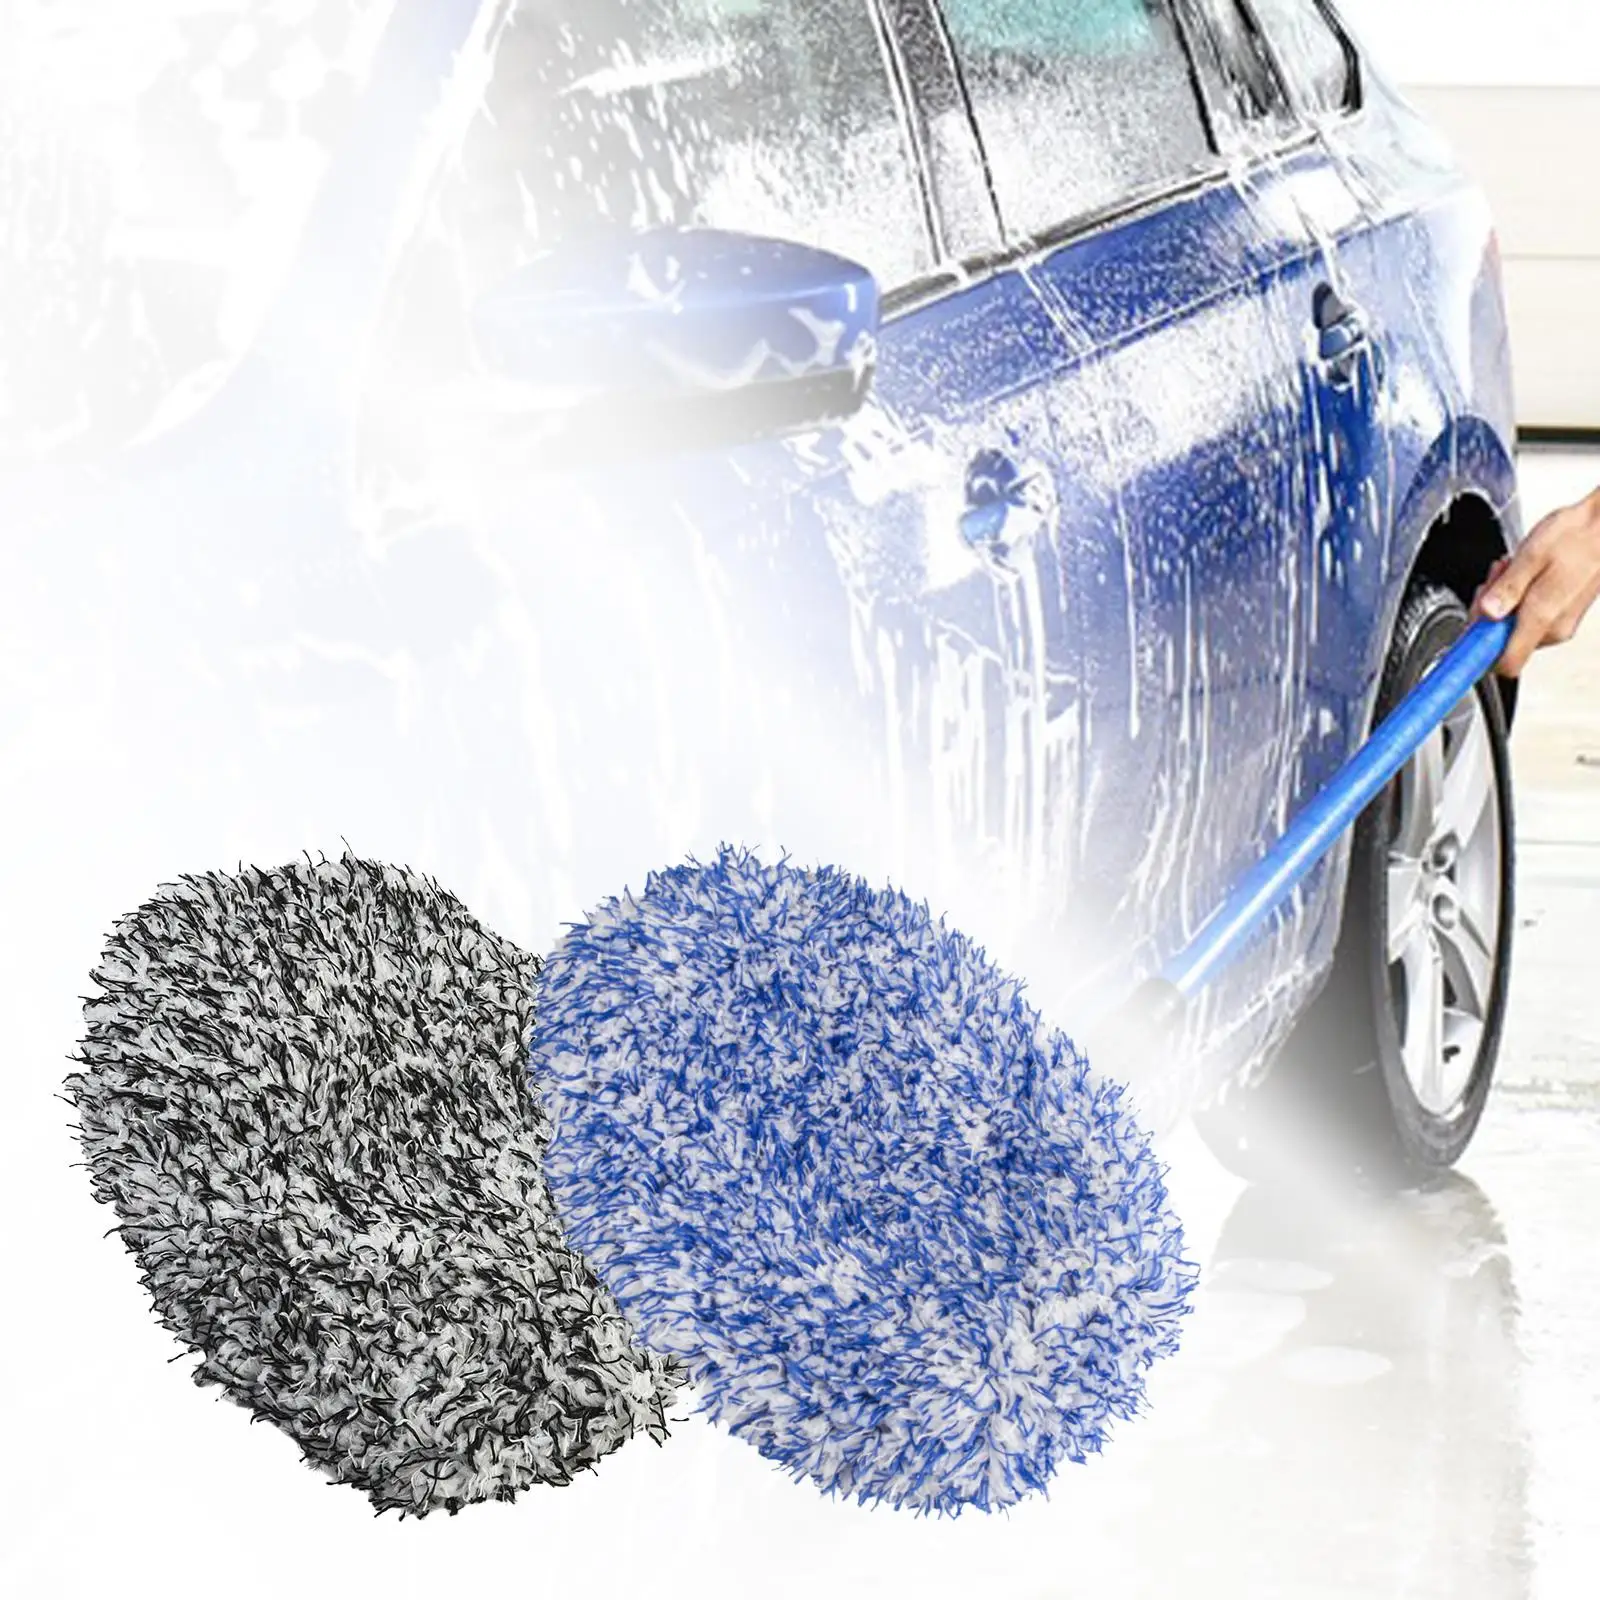 Car Wash Mop Head Only Replaceable Easily Disassemble and Install No Handle for Long Handle Cleaning Mop